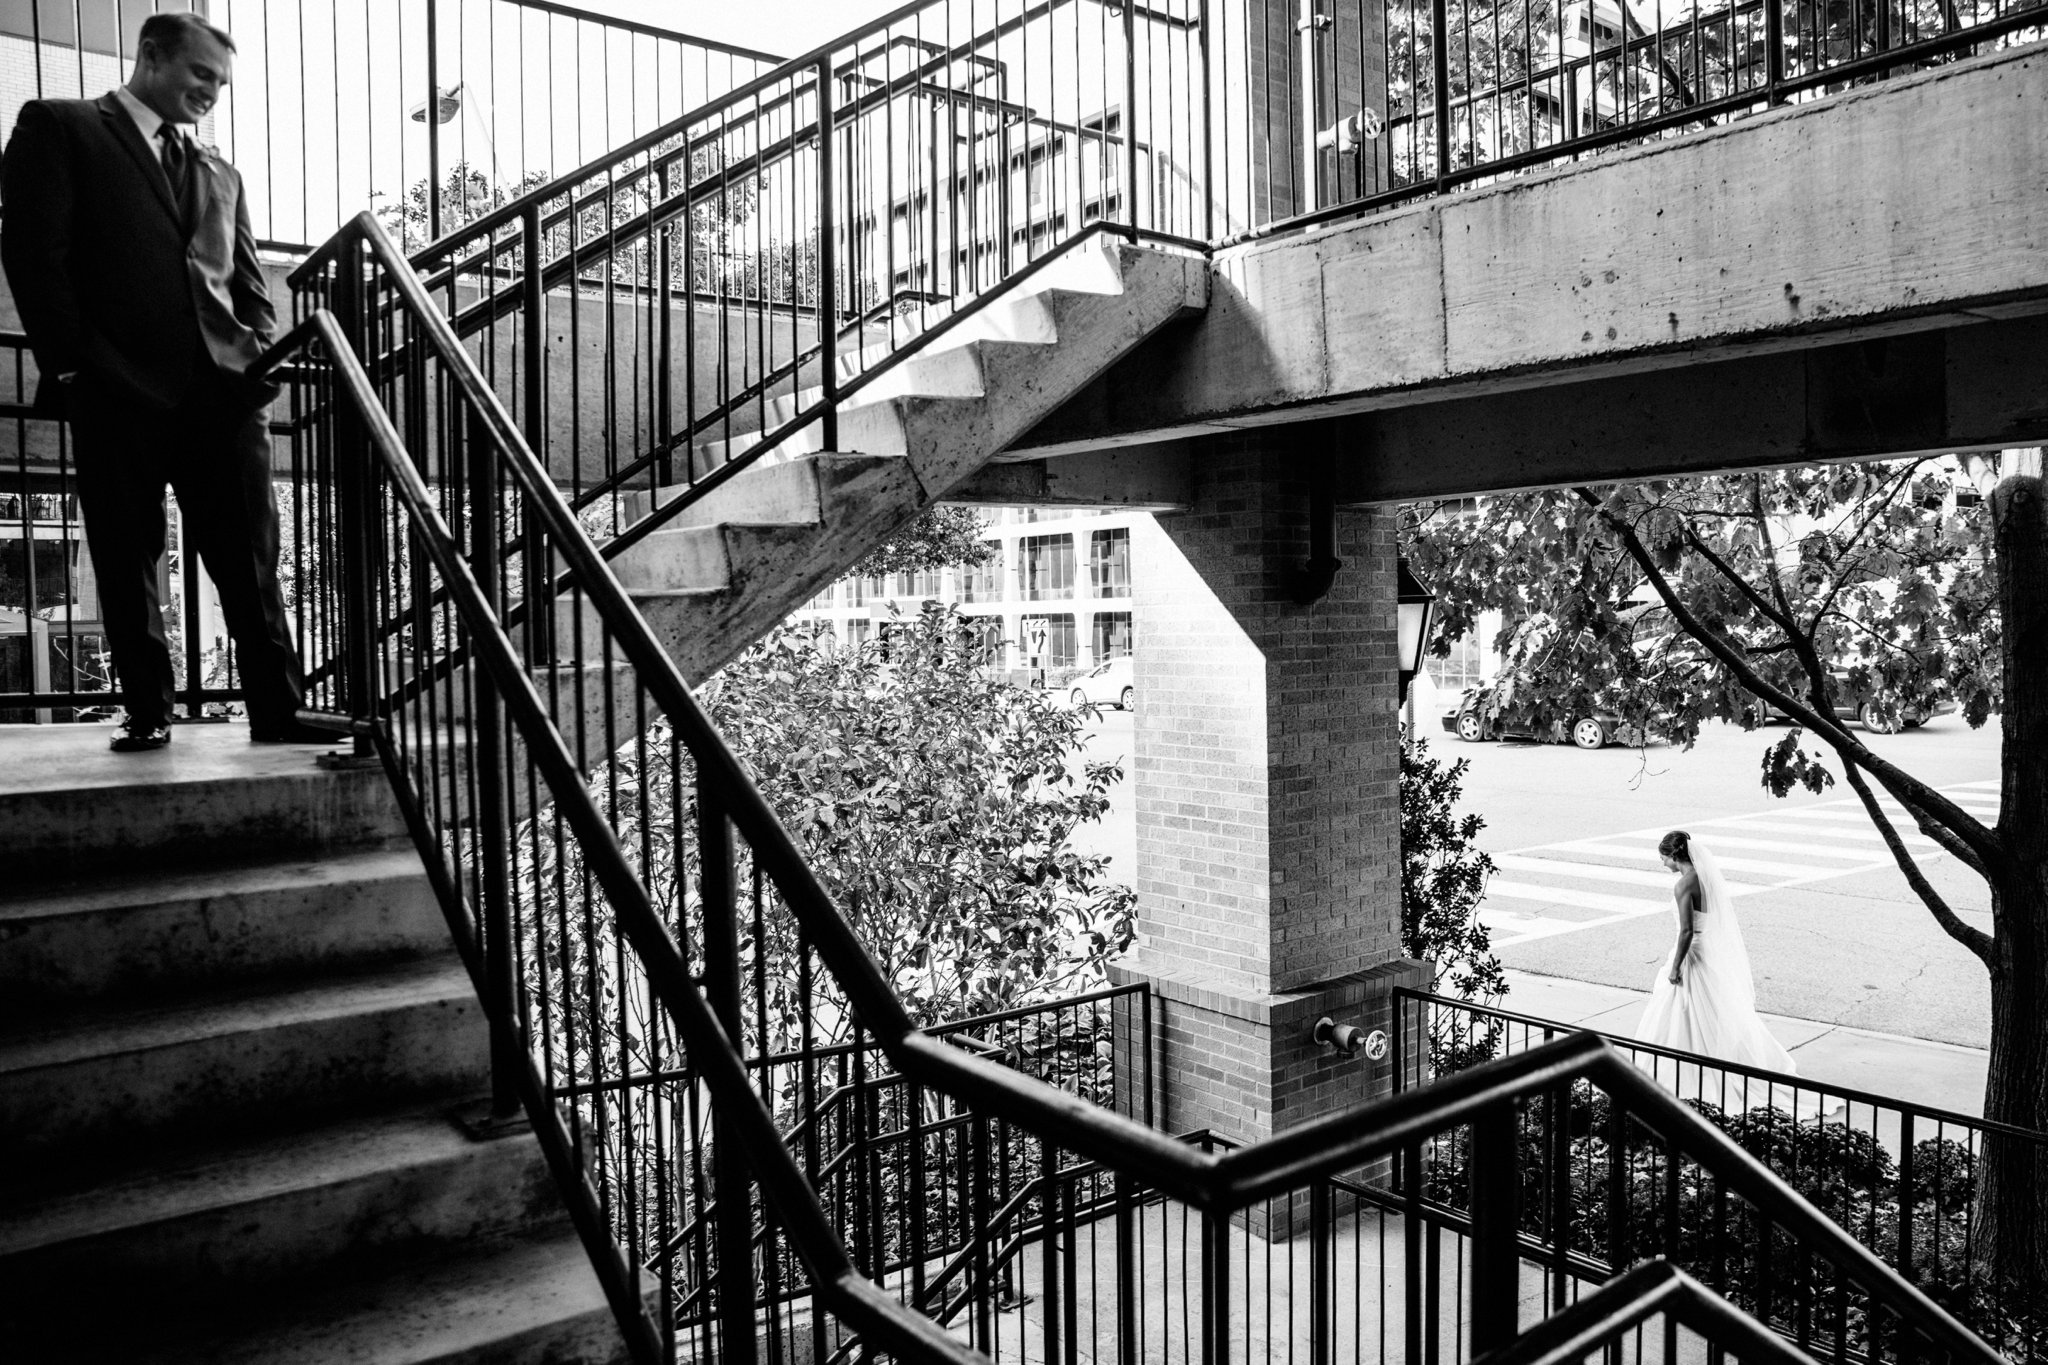 black and white | wedding | wedding photos | wedding photography | images by feliciathephotographer.com | Country Club Plaza | Kansas City | Unity Temple | first look | groom solo shot | staircase meeting | groom reaction 